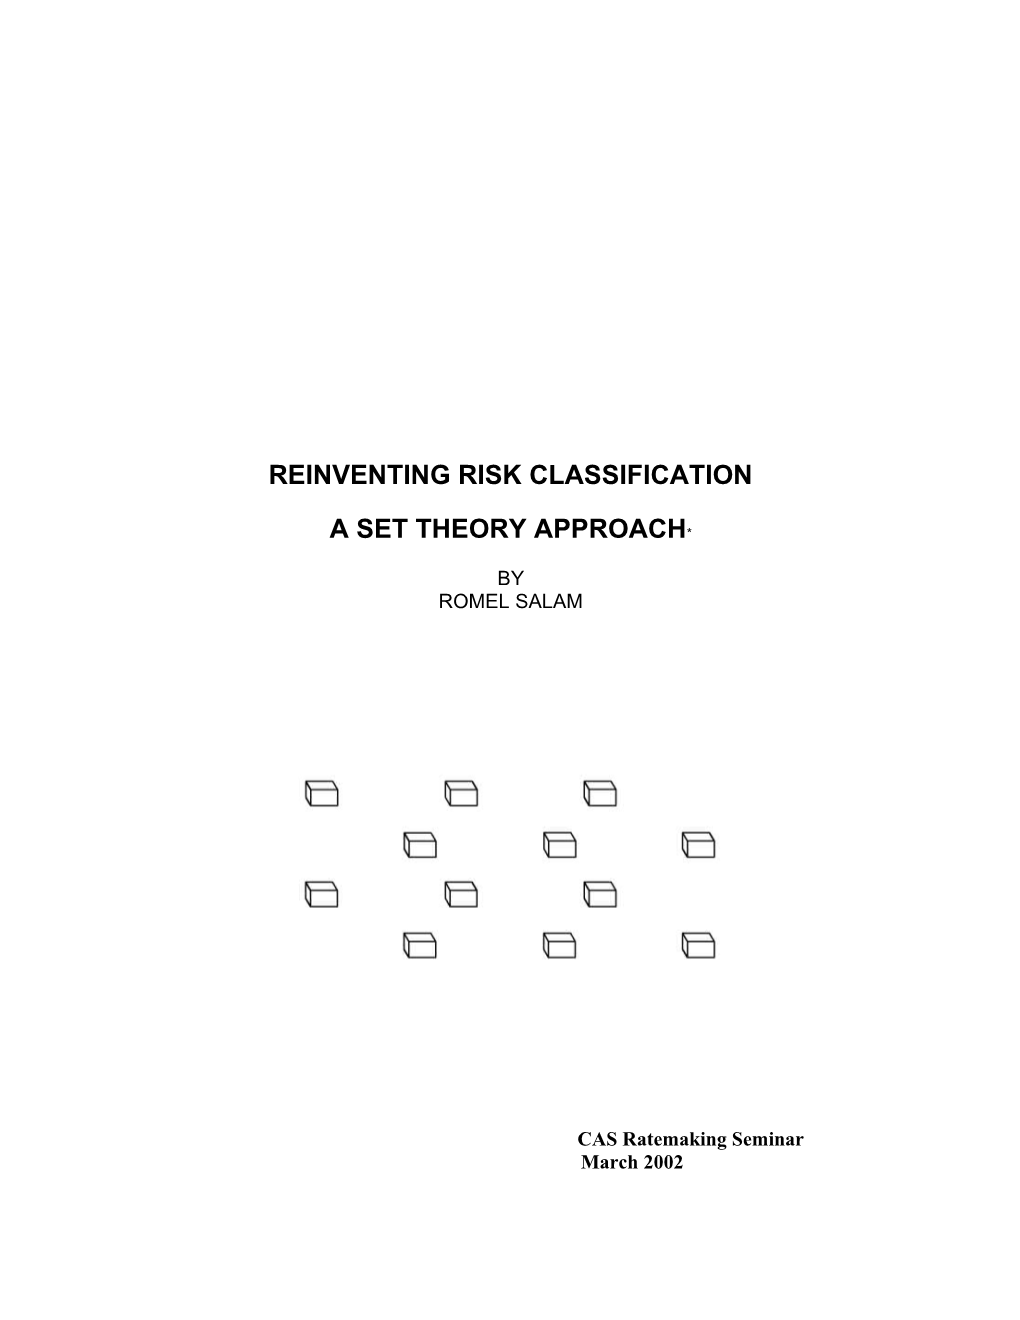 Reinventing Risk Classification